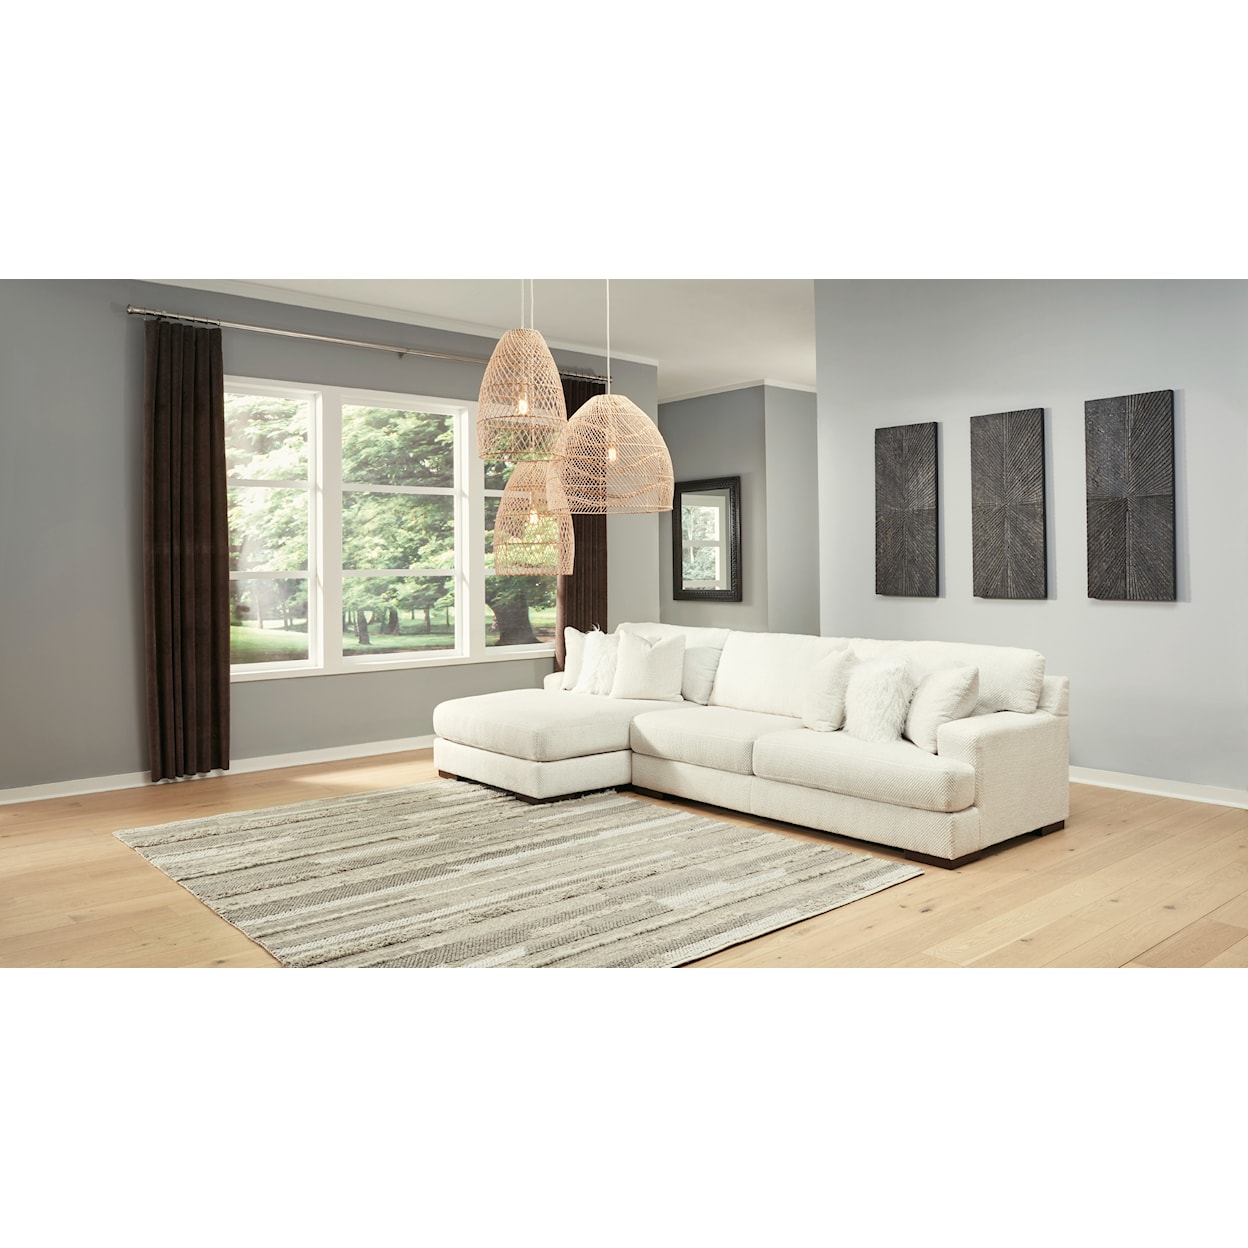 Signature Zada 2-Piece Sectional with Chaise